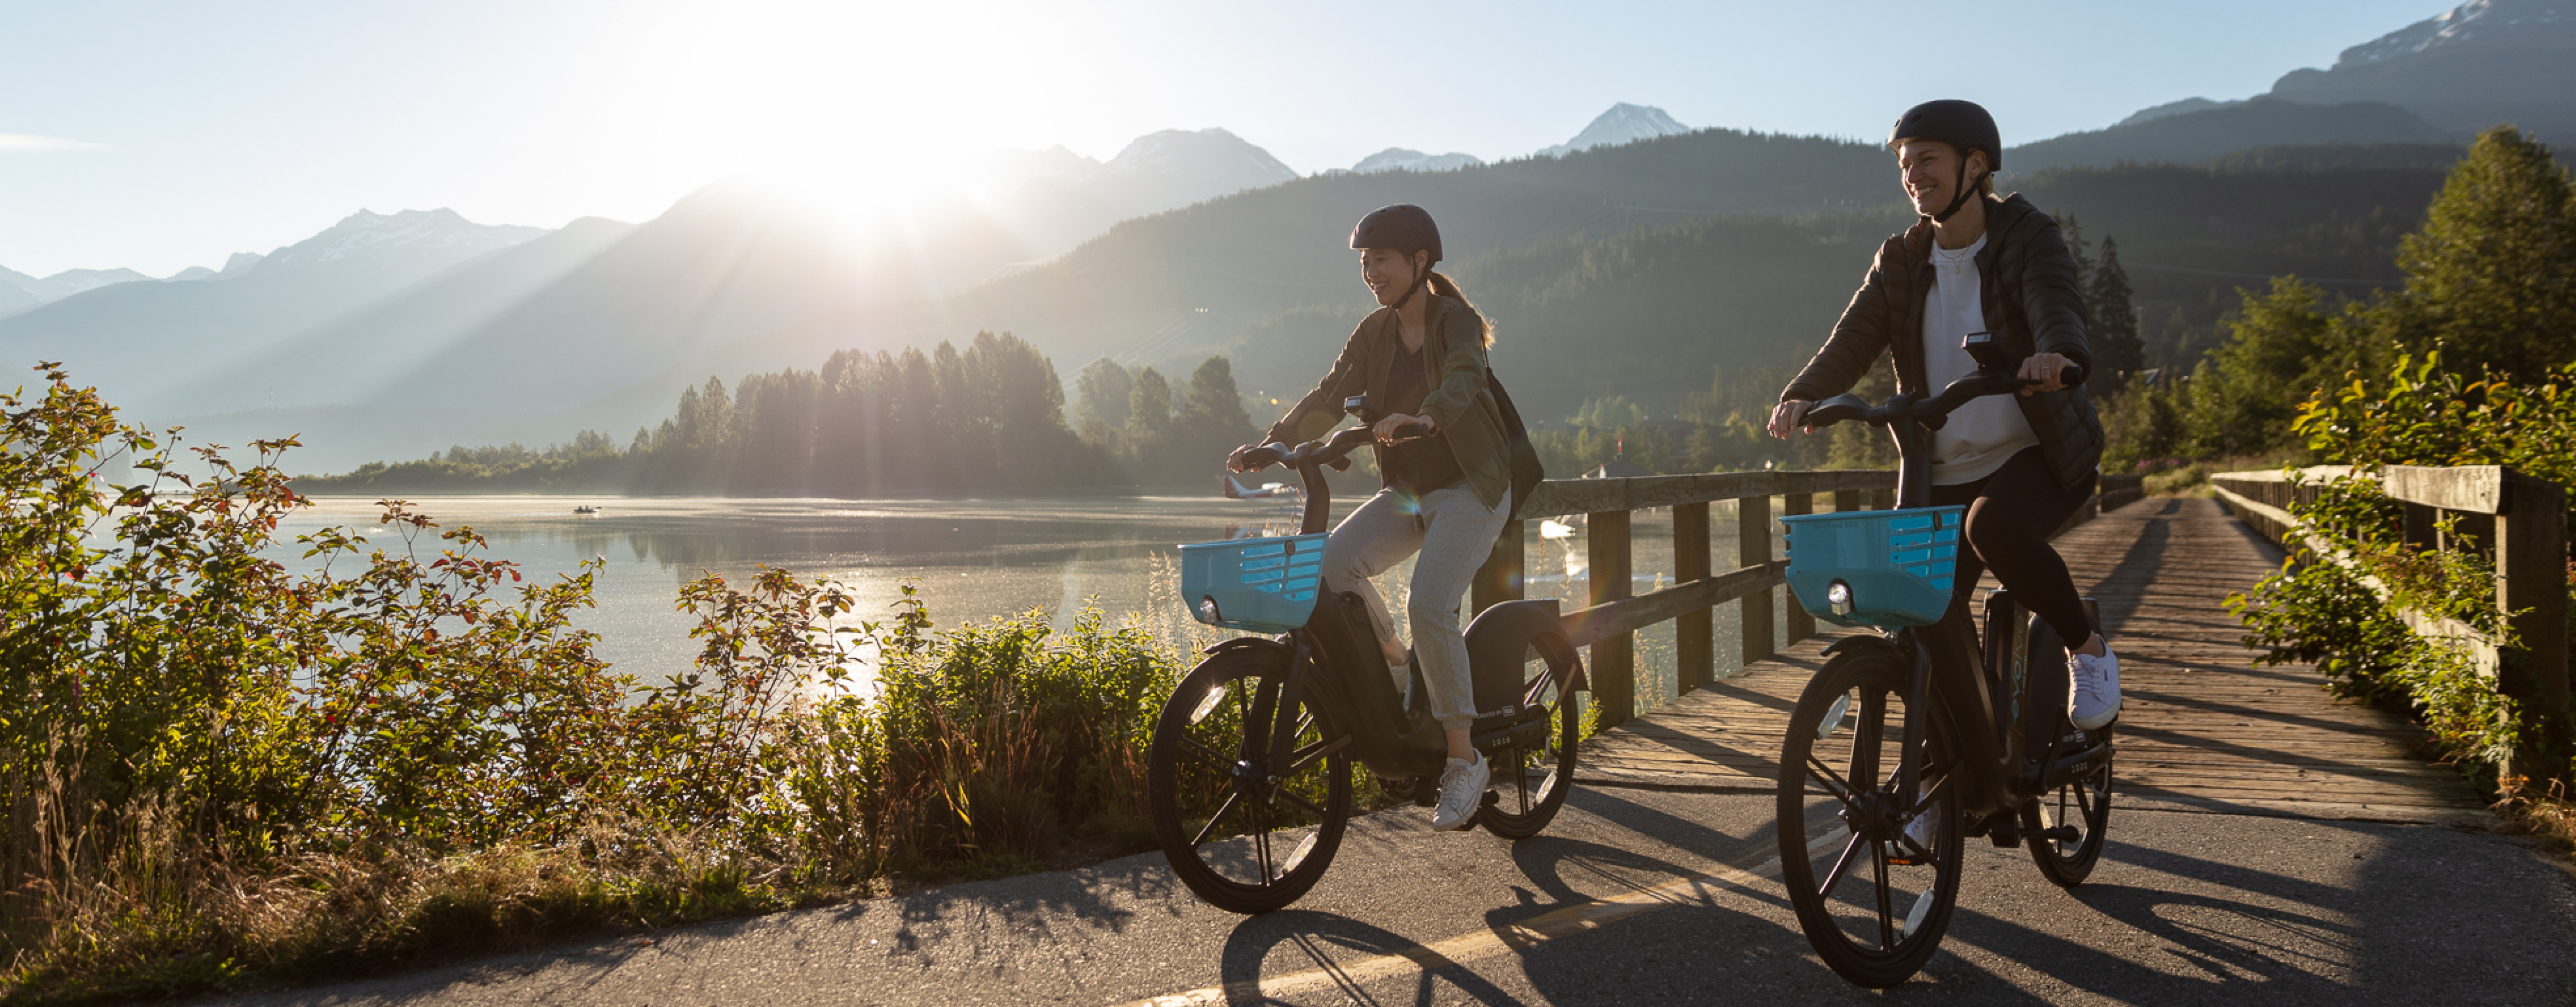 Two women ride Evolve e-bikes on a trail in Whistler.